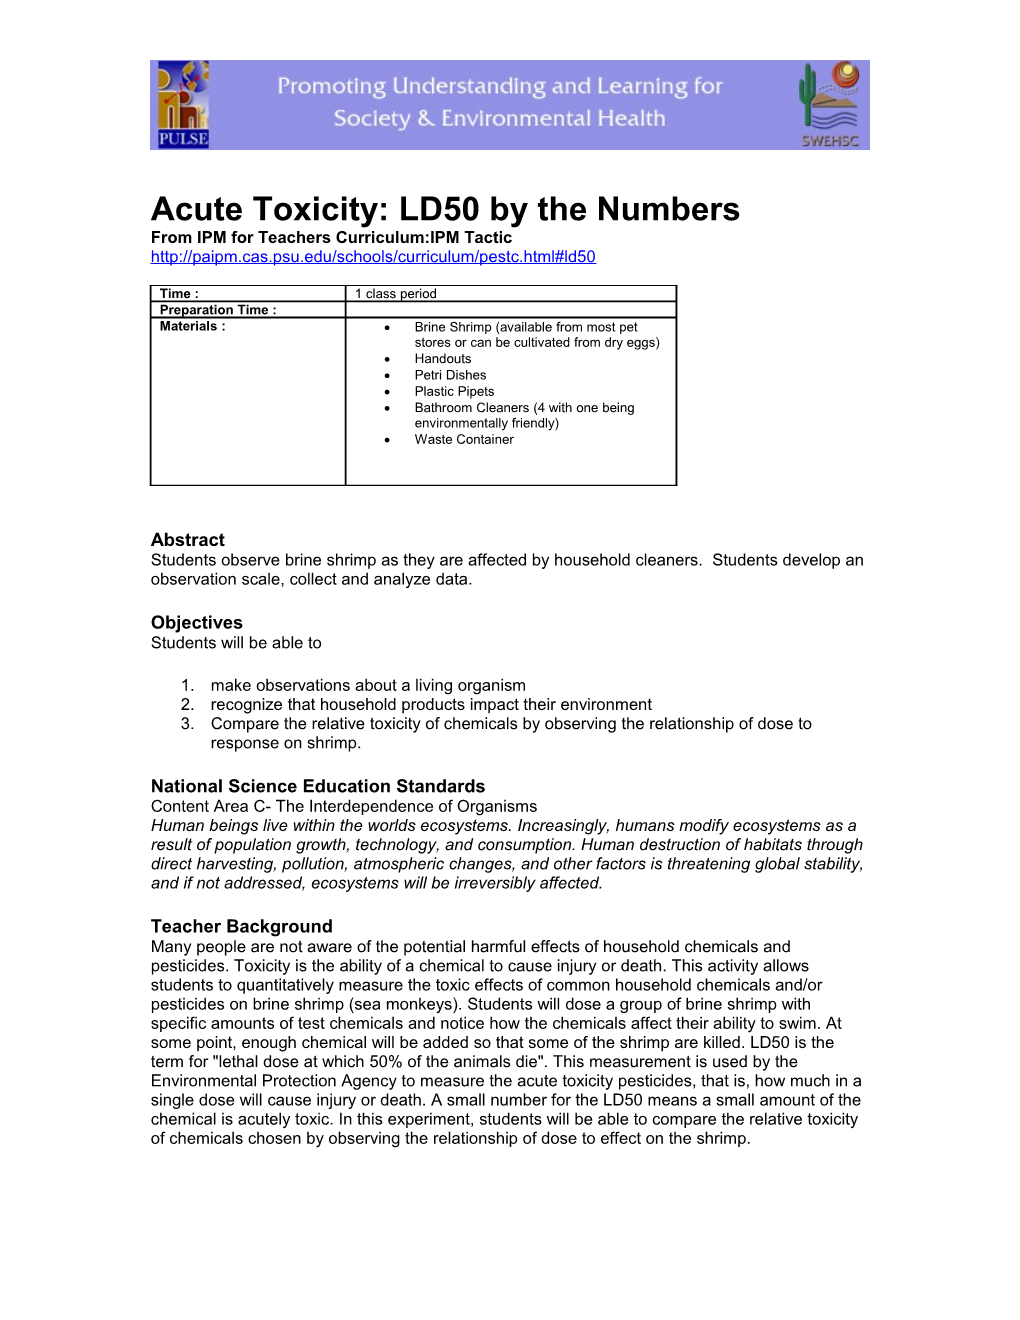 Acute Toxicity: LD50 by the Numbers